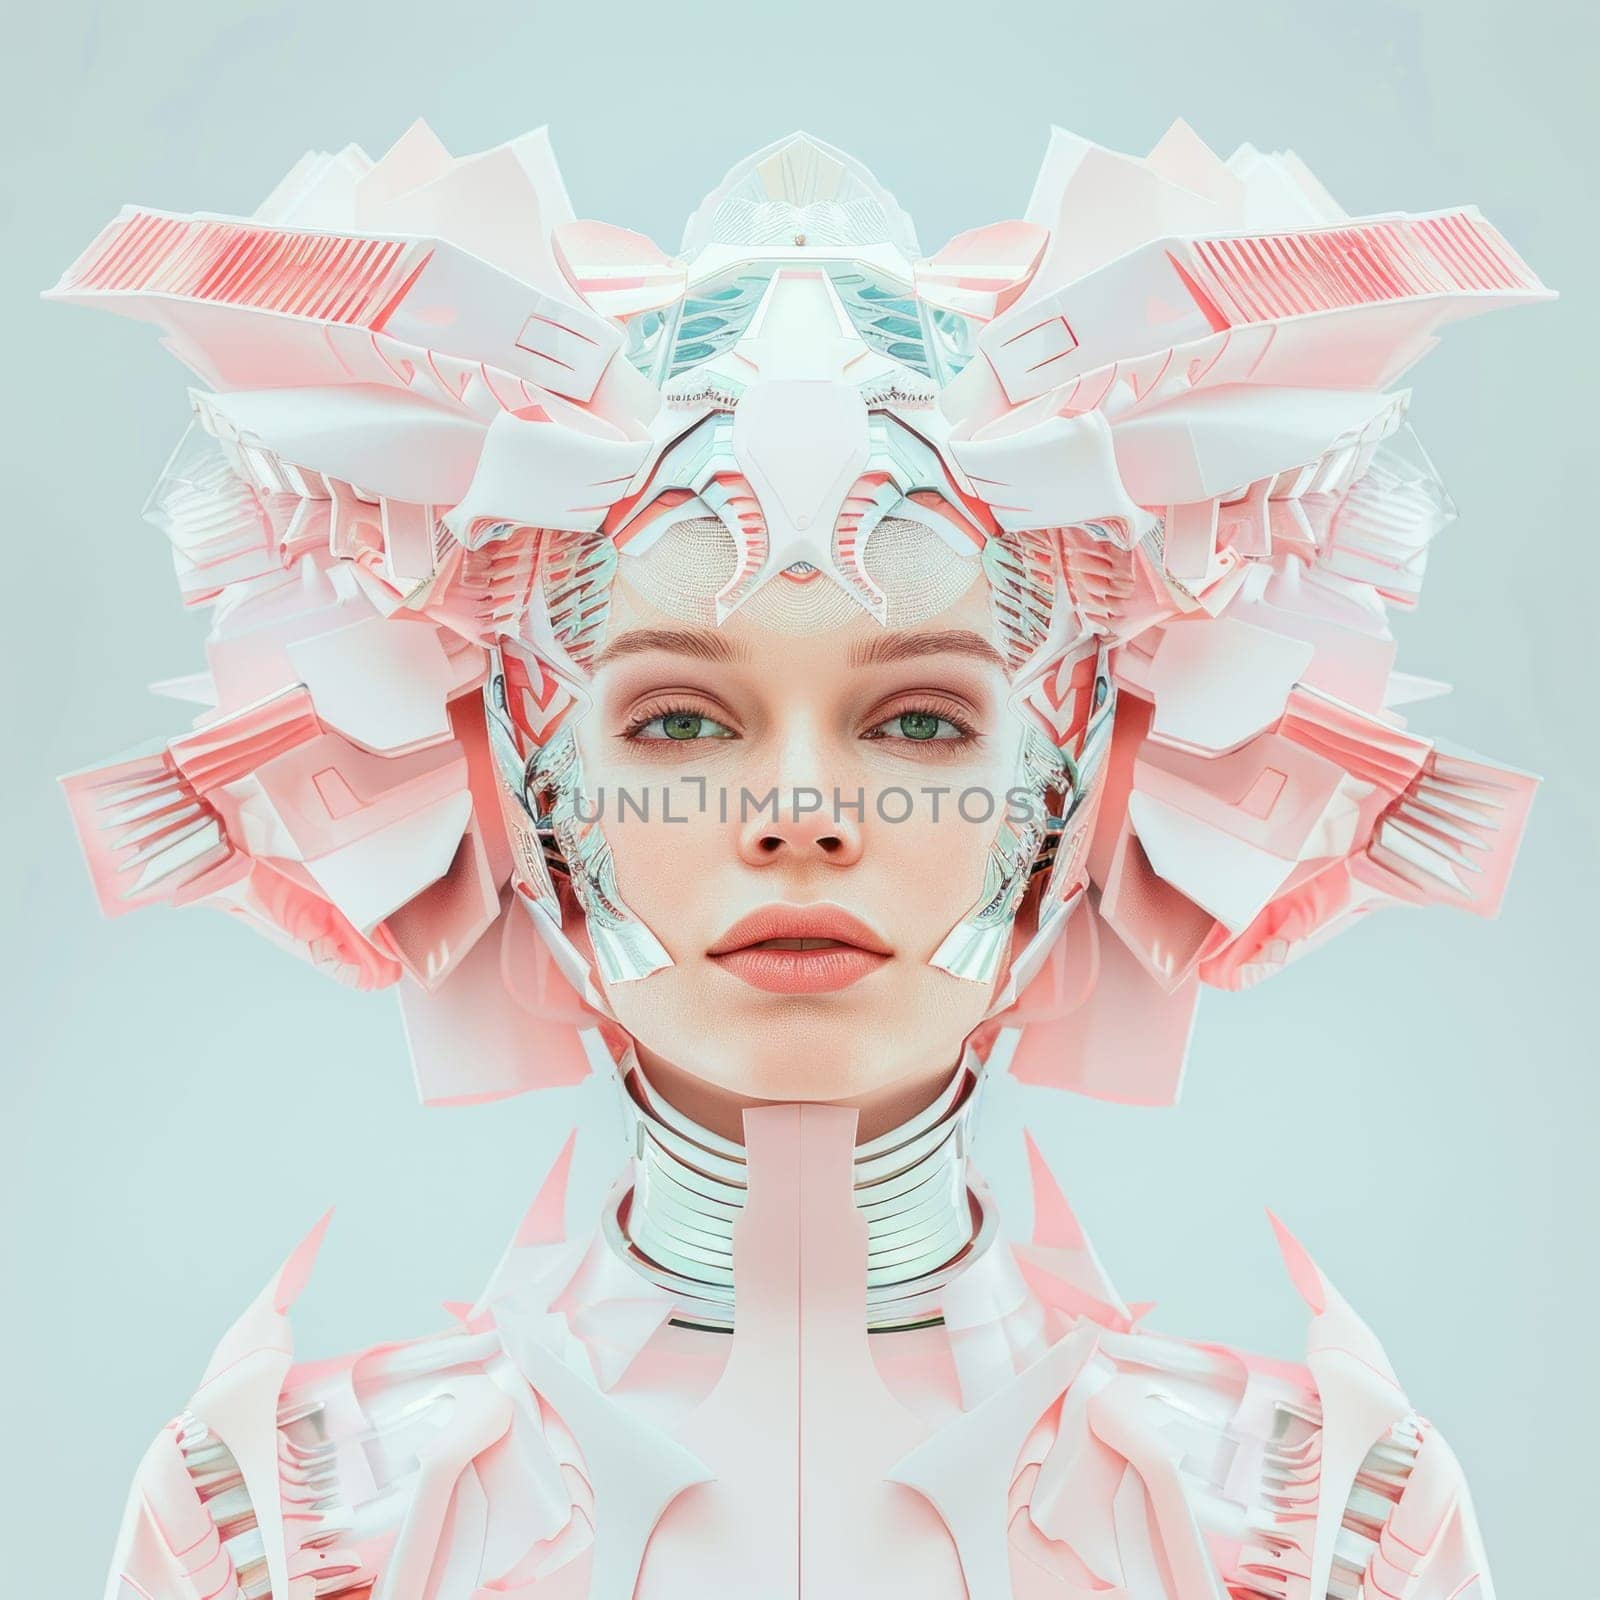 Robot head woman surrounded by pink flowers a creative fusion of technology and nature